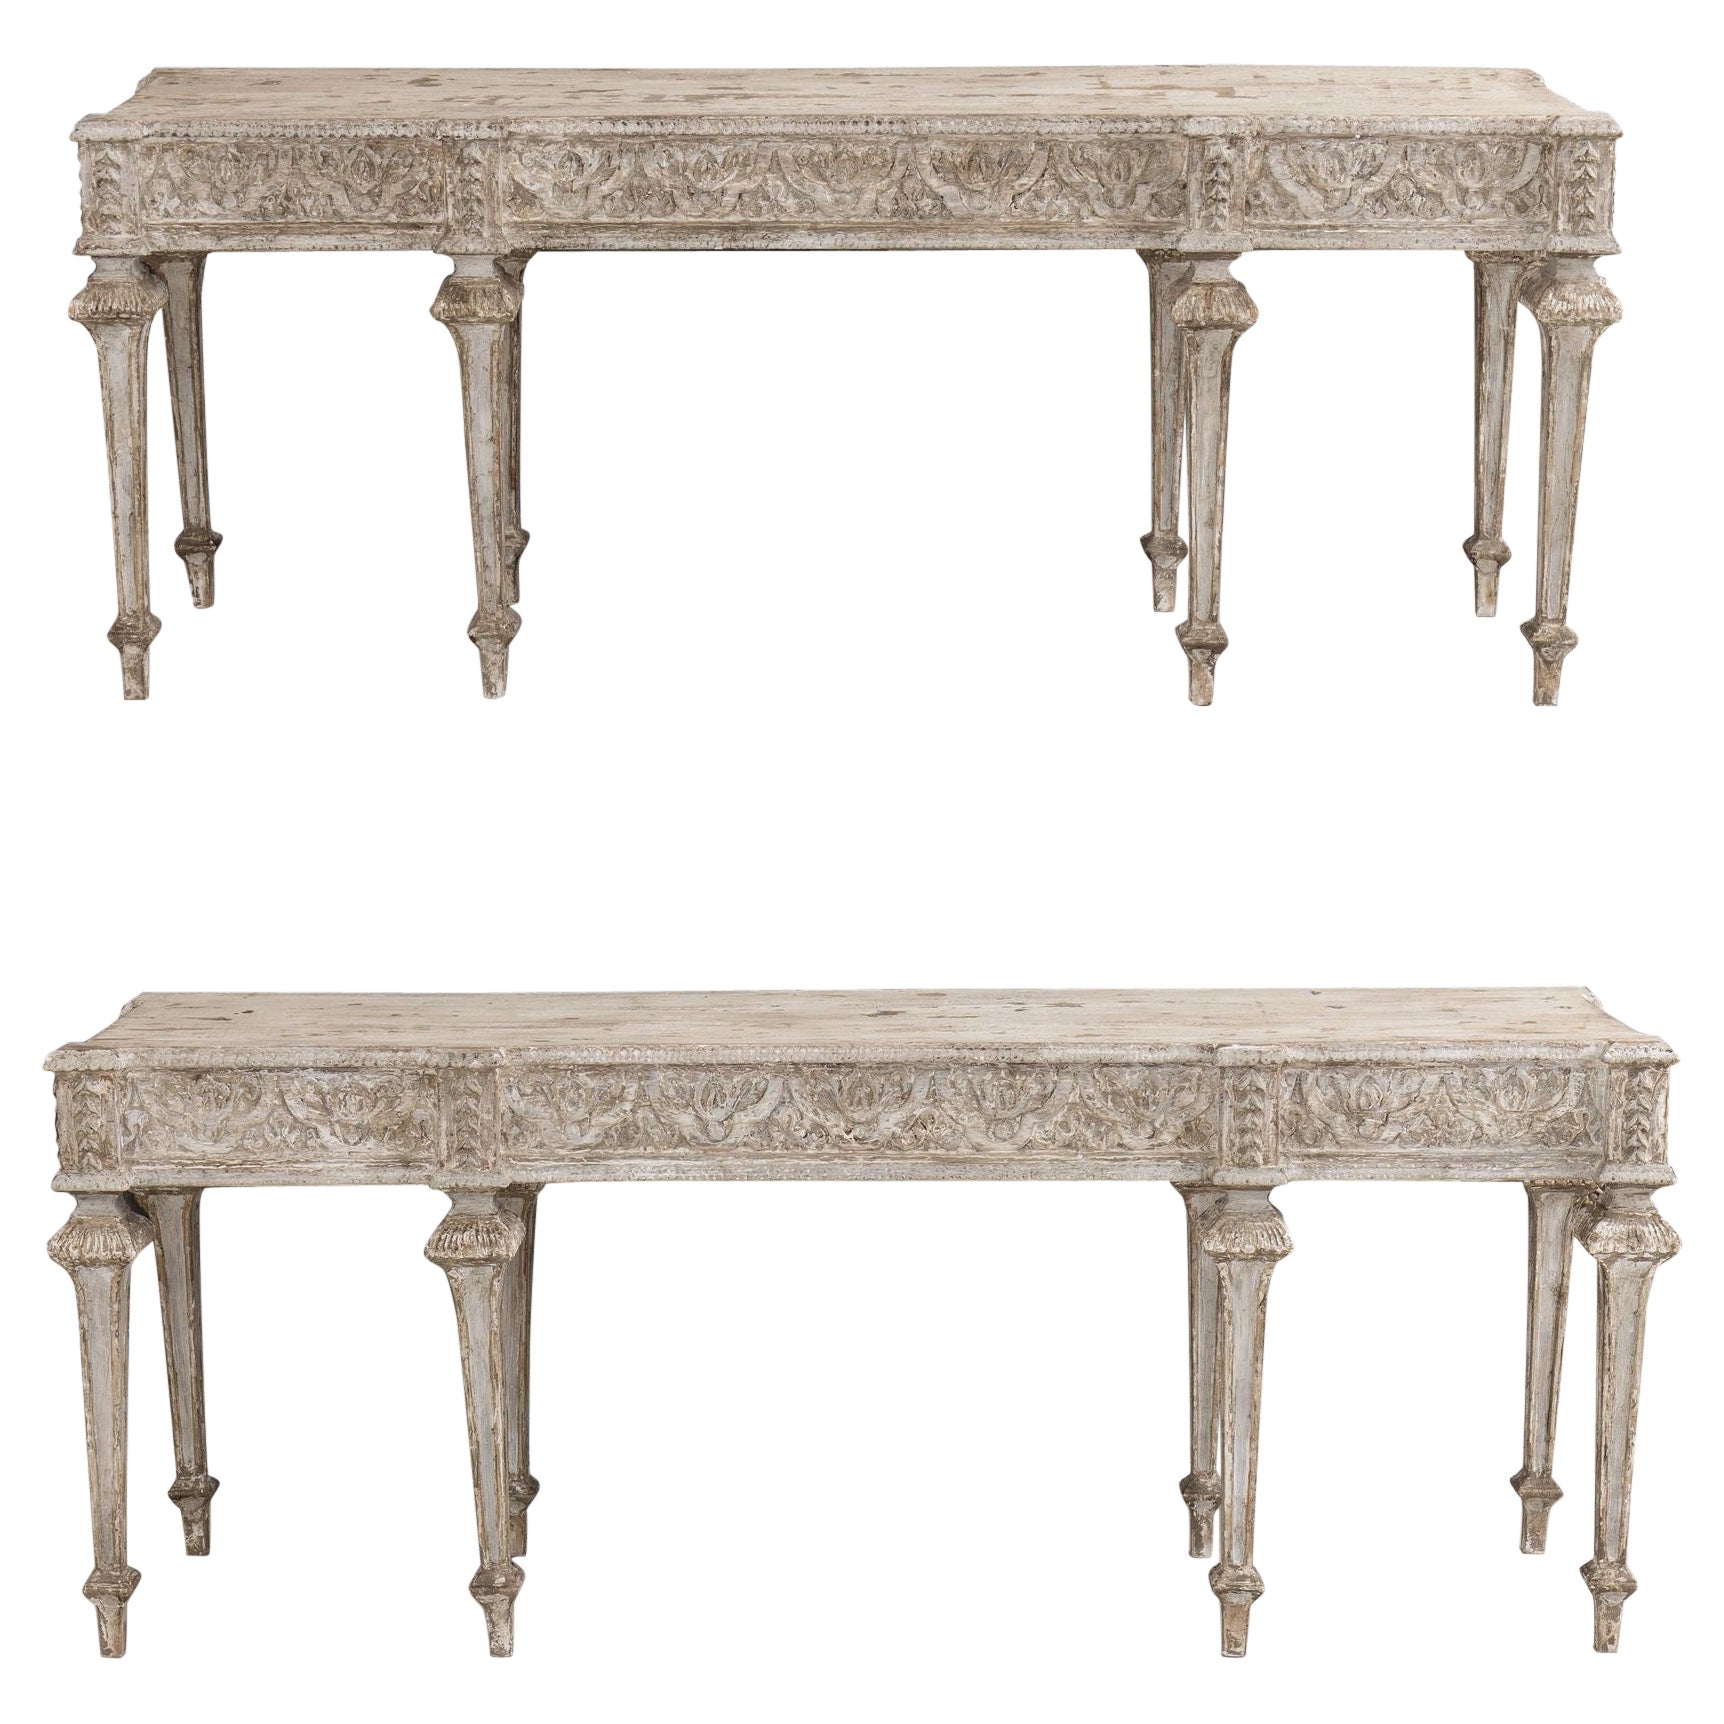 Pair of Italian Neoclassical Style Painted Console Tables